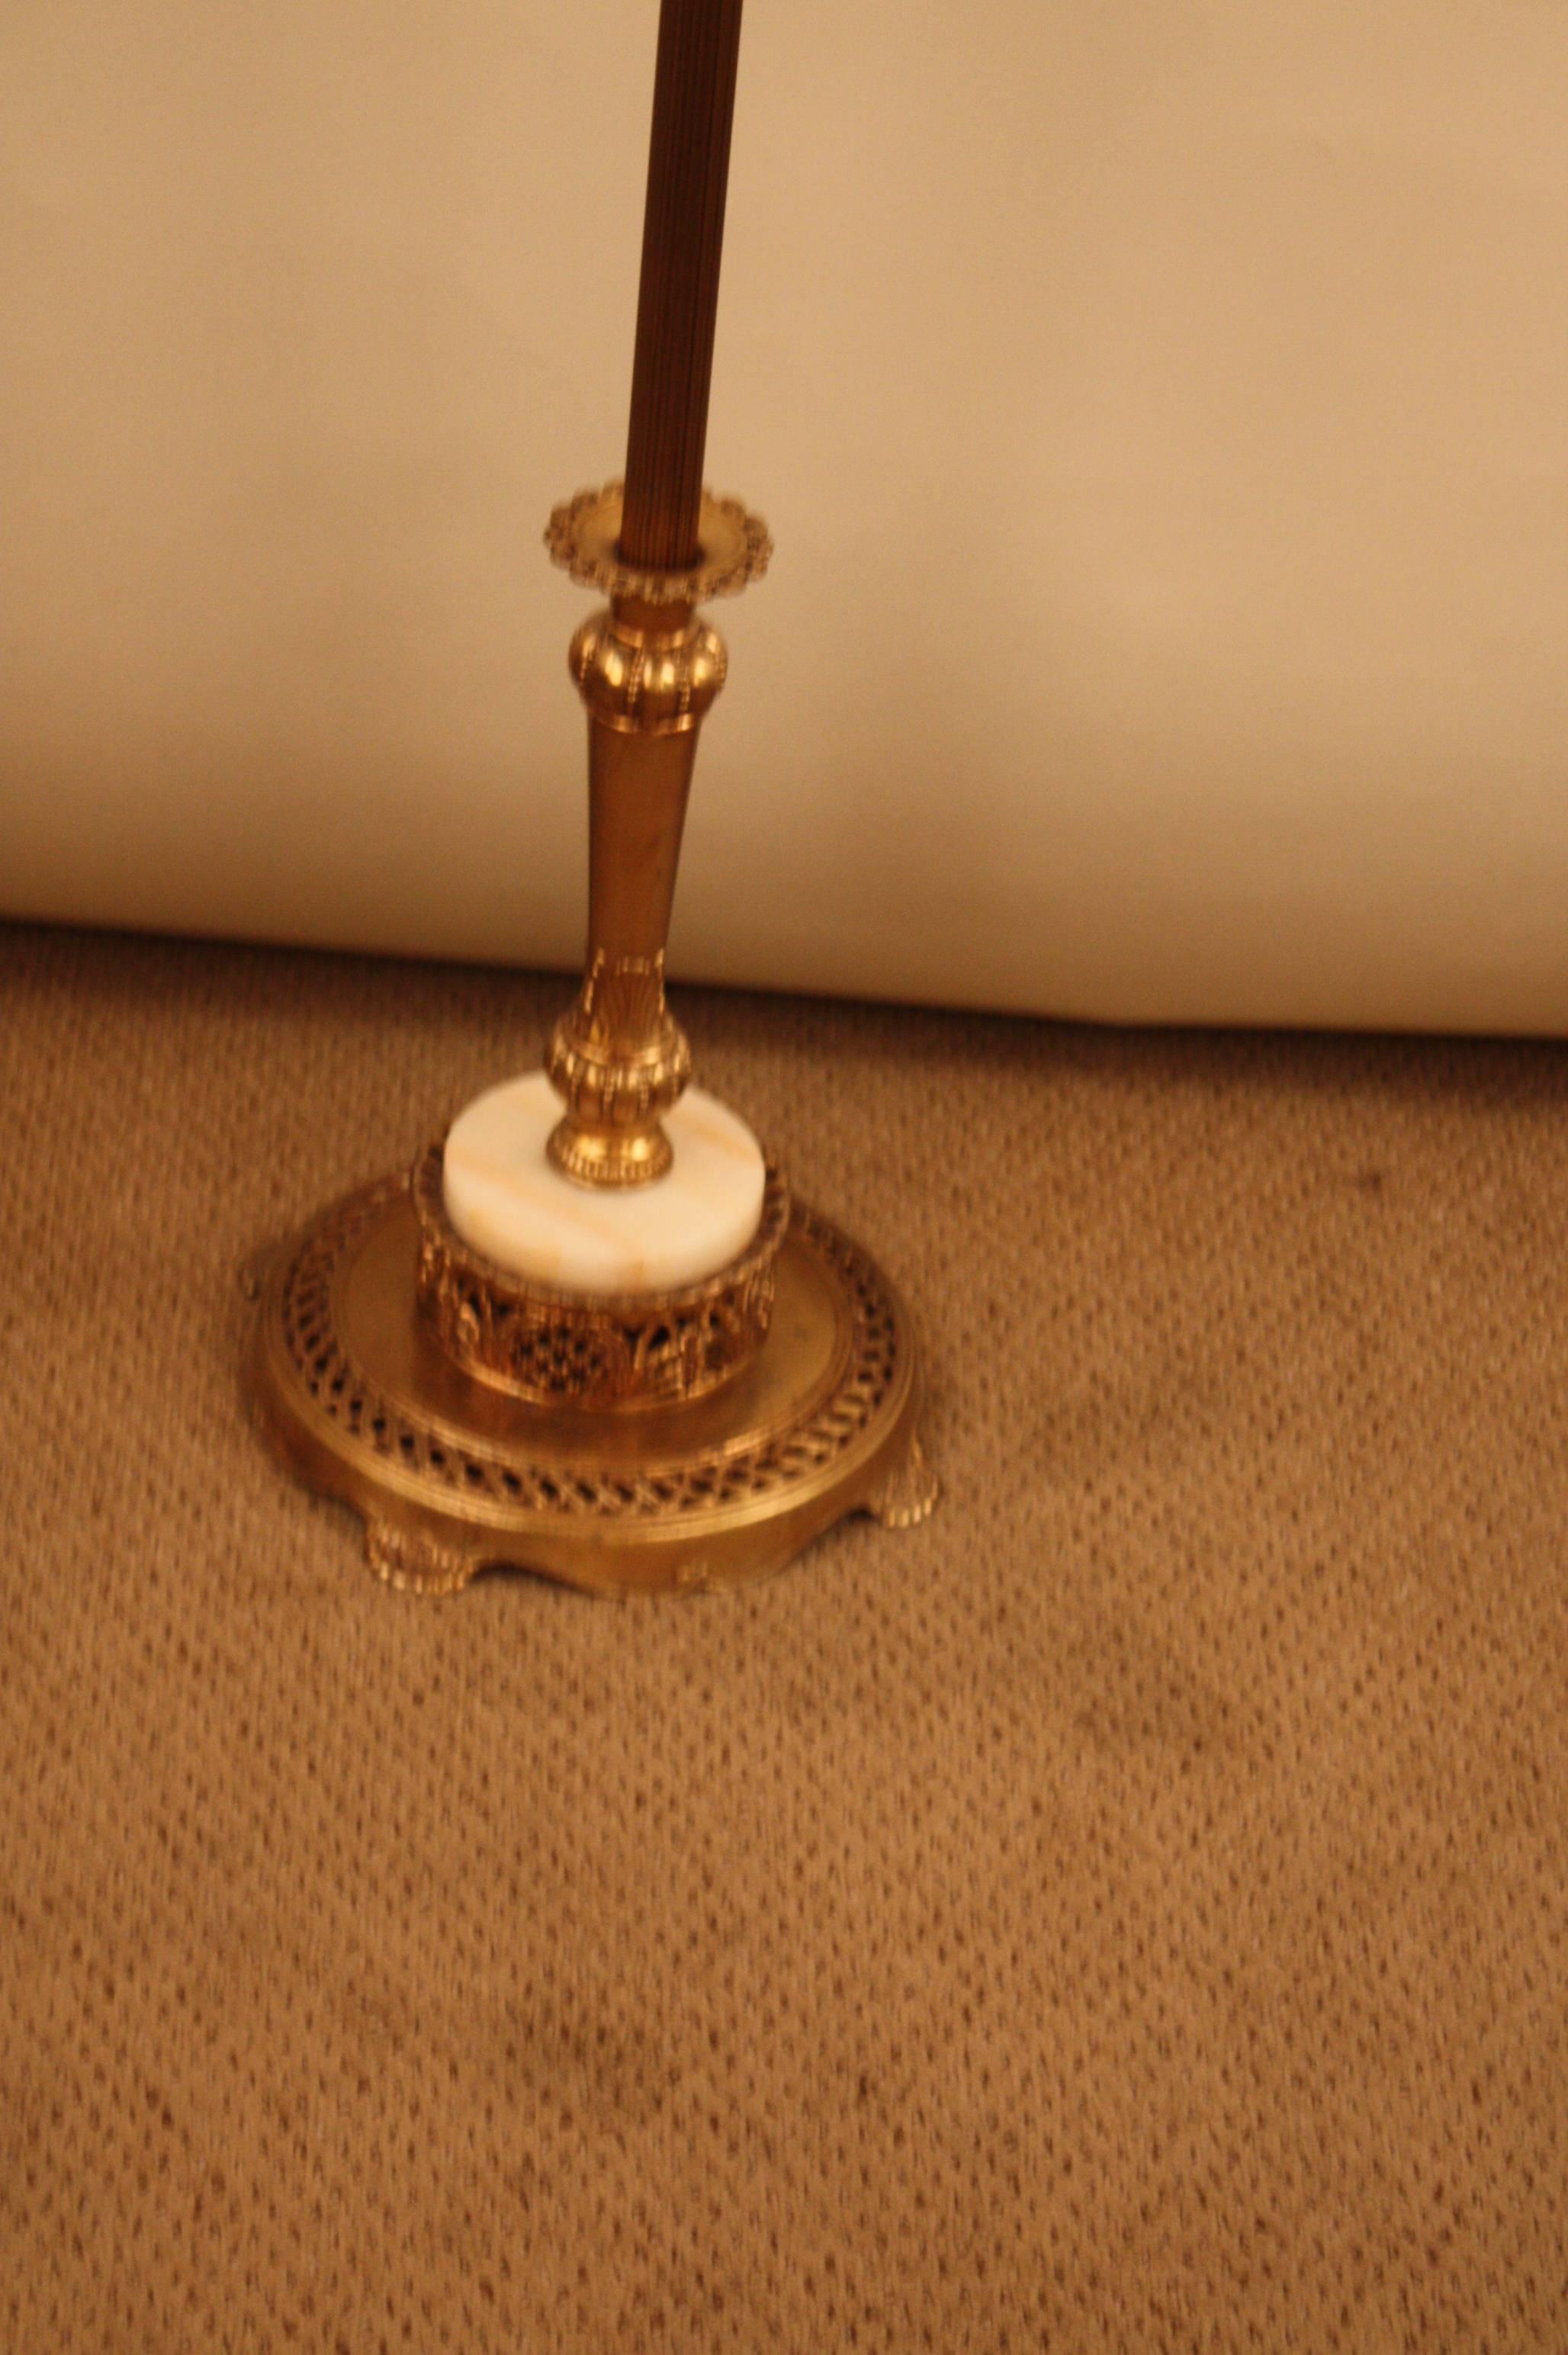 Elegant American Art Deco torchiere floor lamp with beautiful gold color and original glass shade.